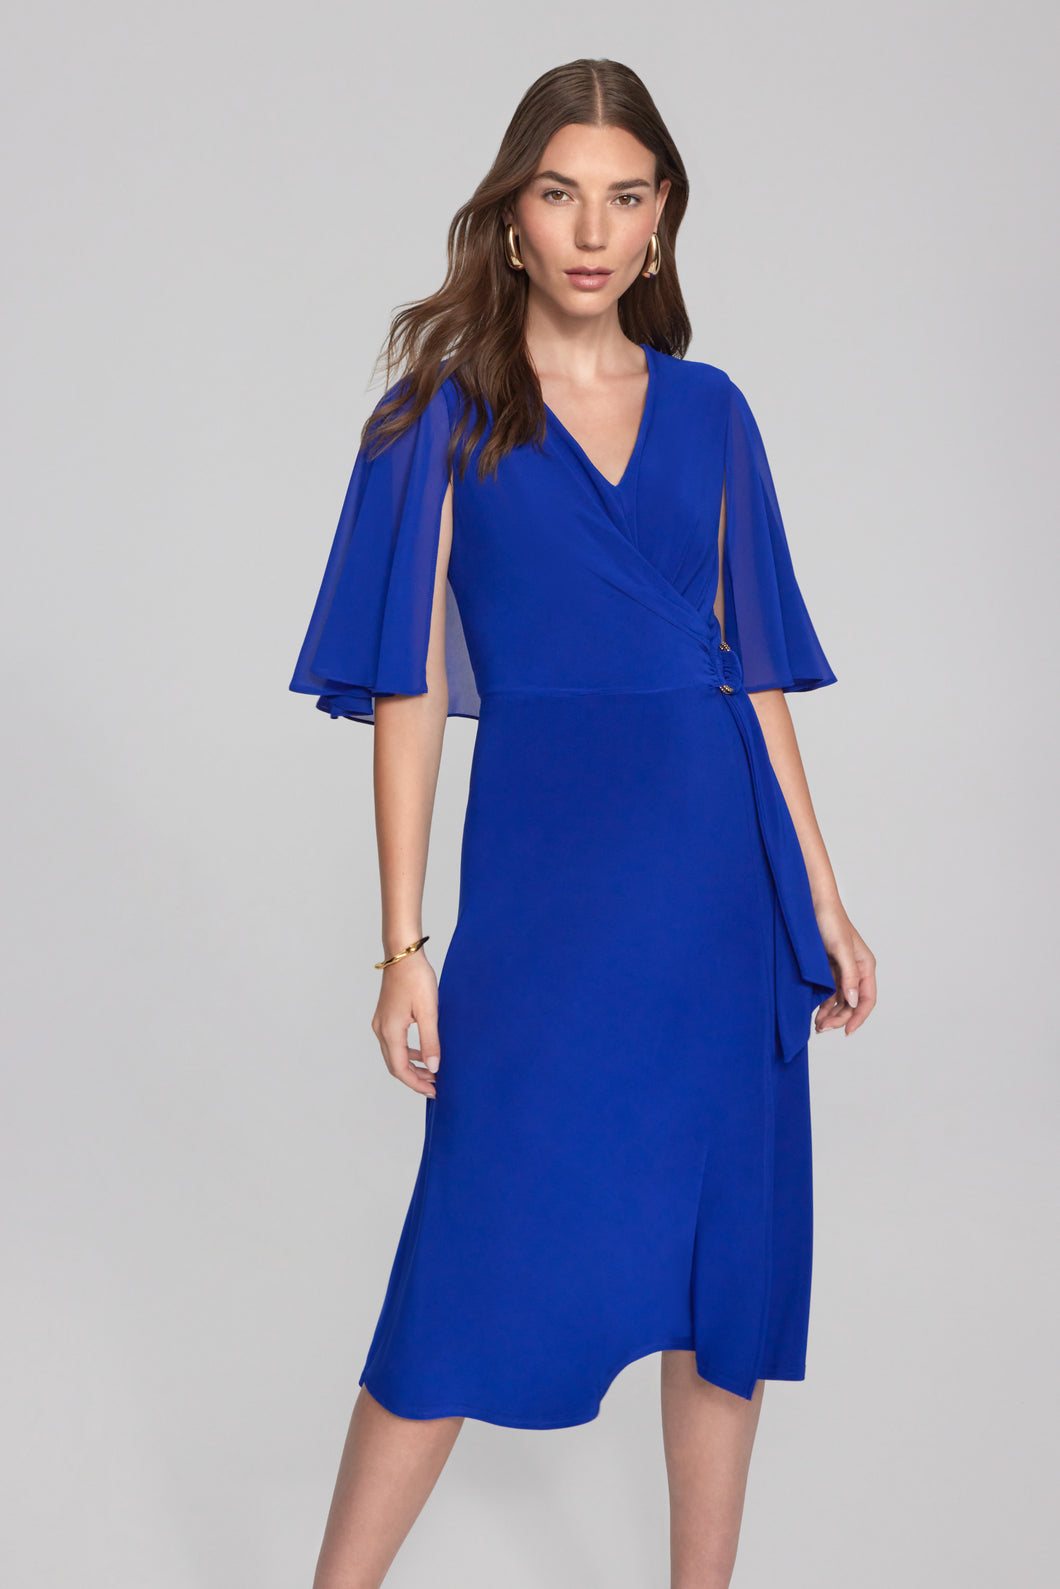 Joseph Ribkoff Royal Sapphire Silky Knit Fit And Flare Dress